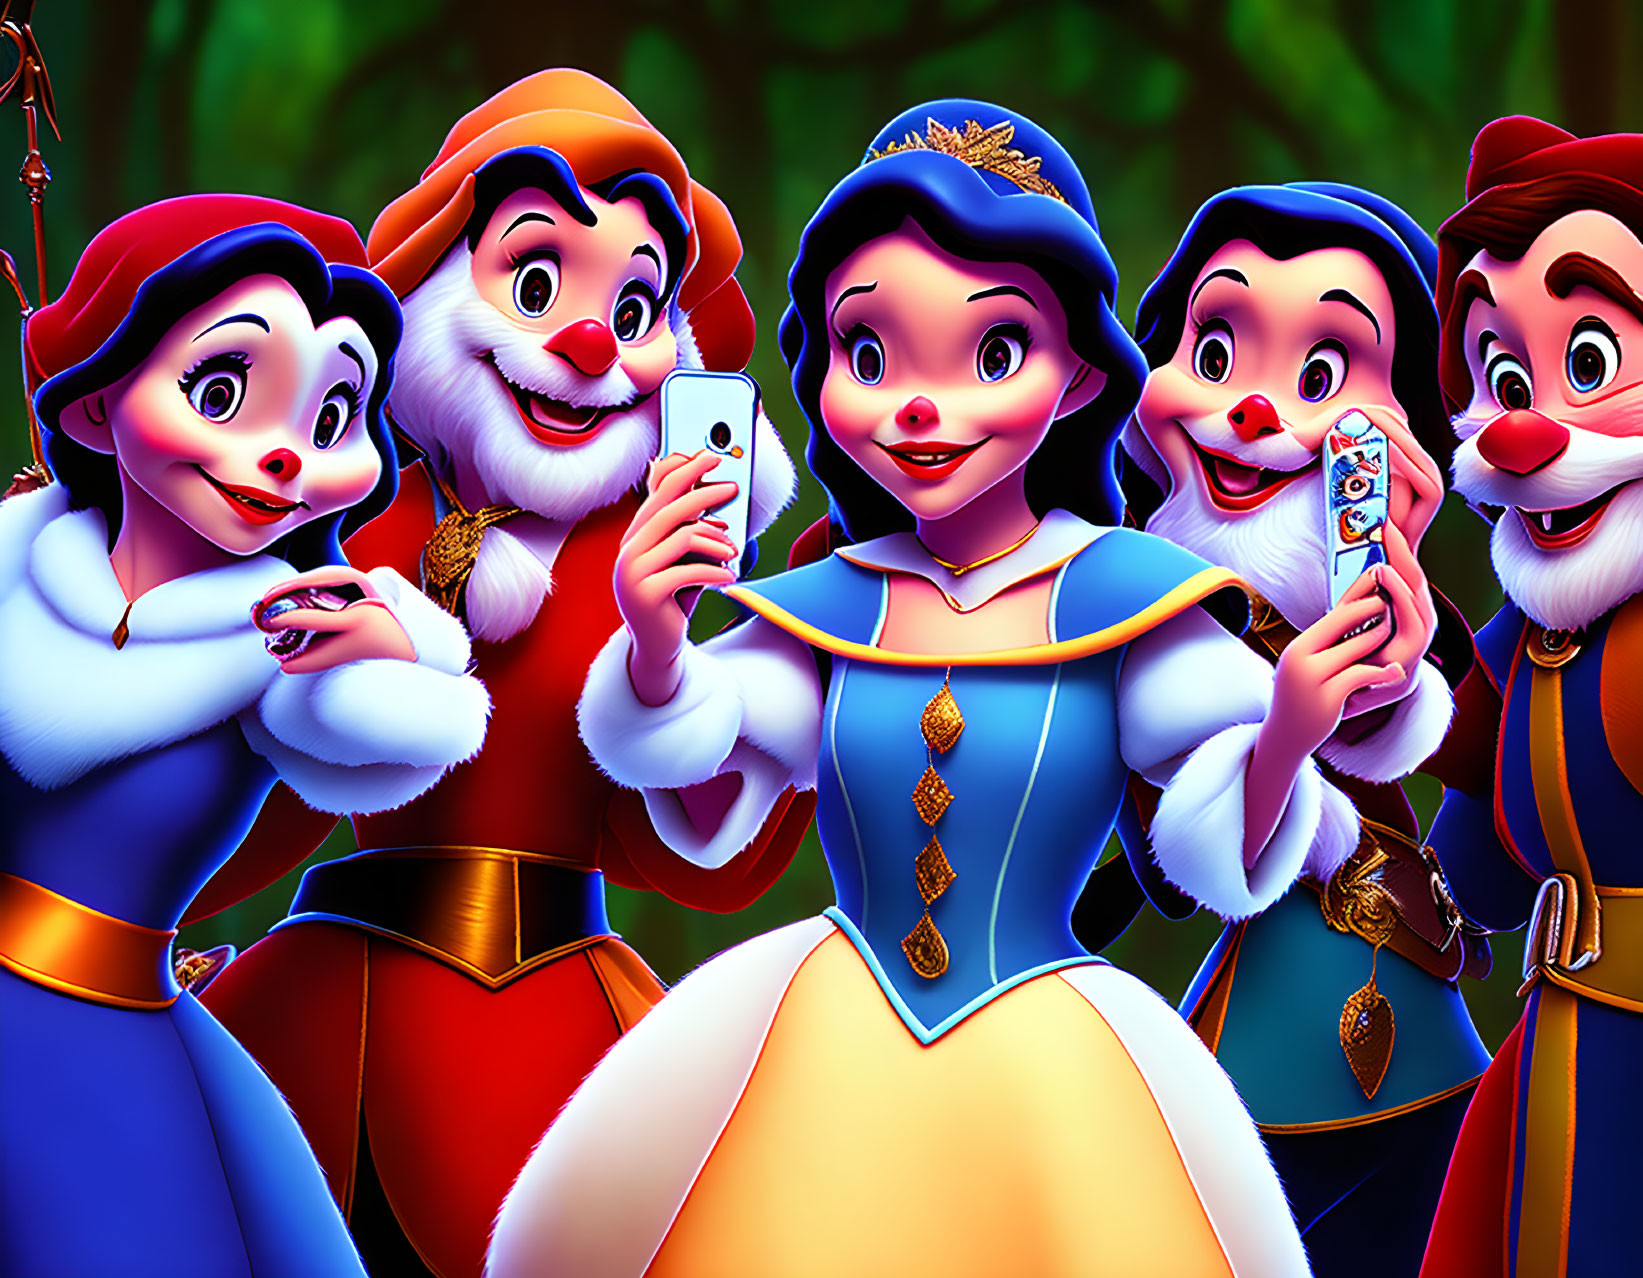 Princess and dwarfs with smartphones in colorful forest